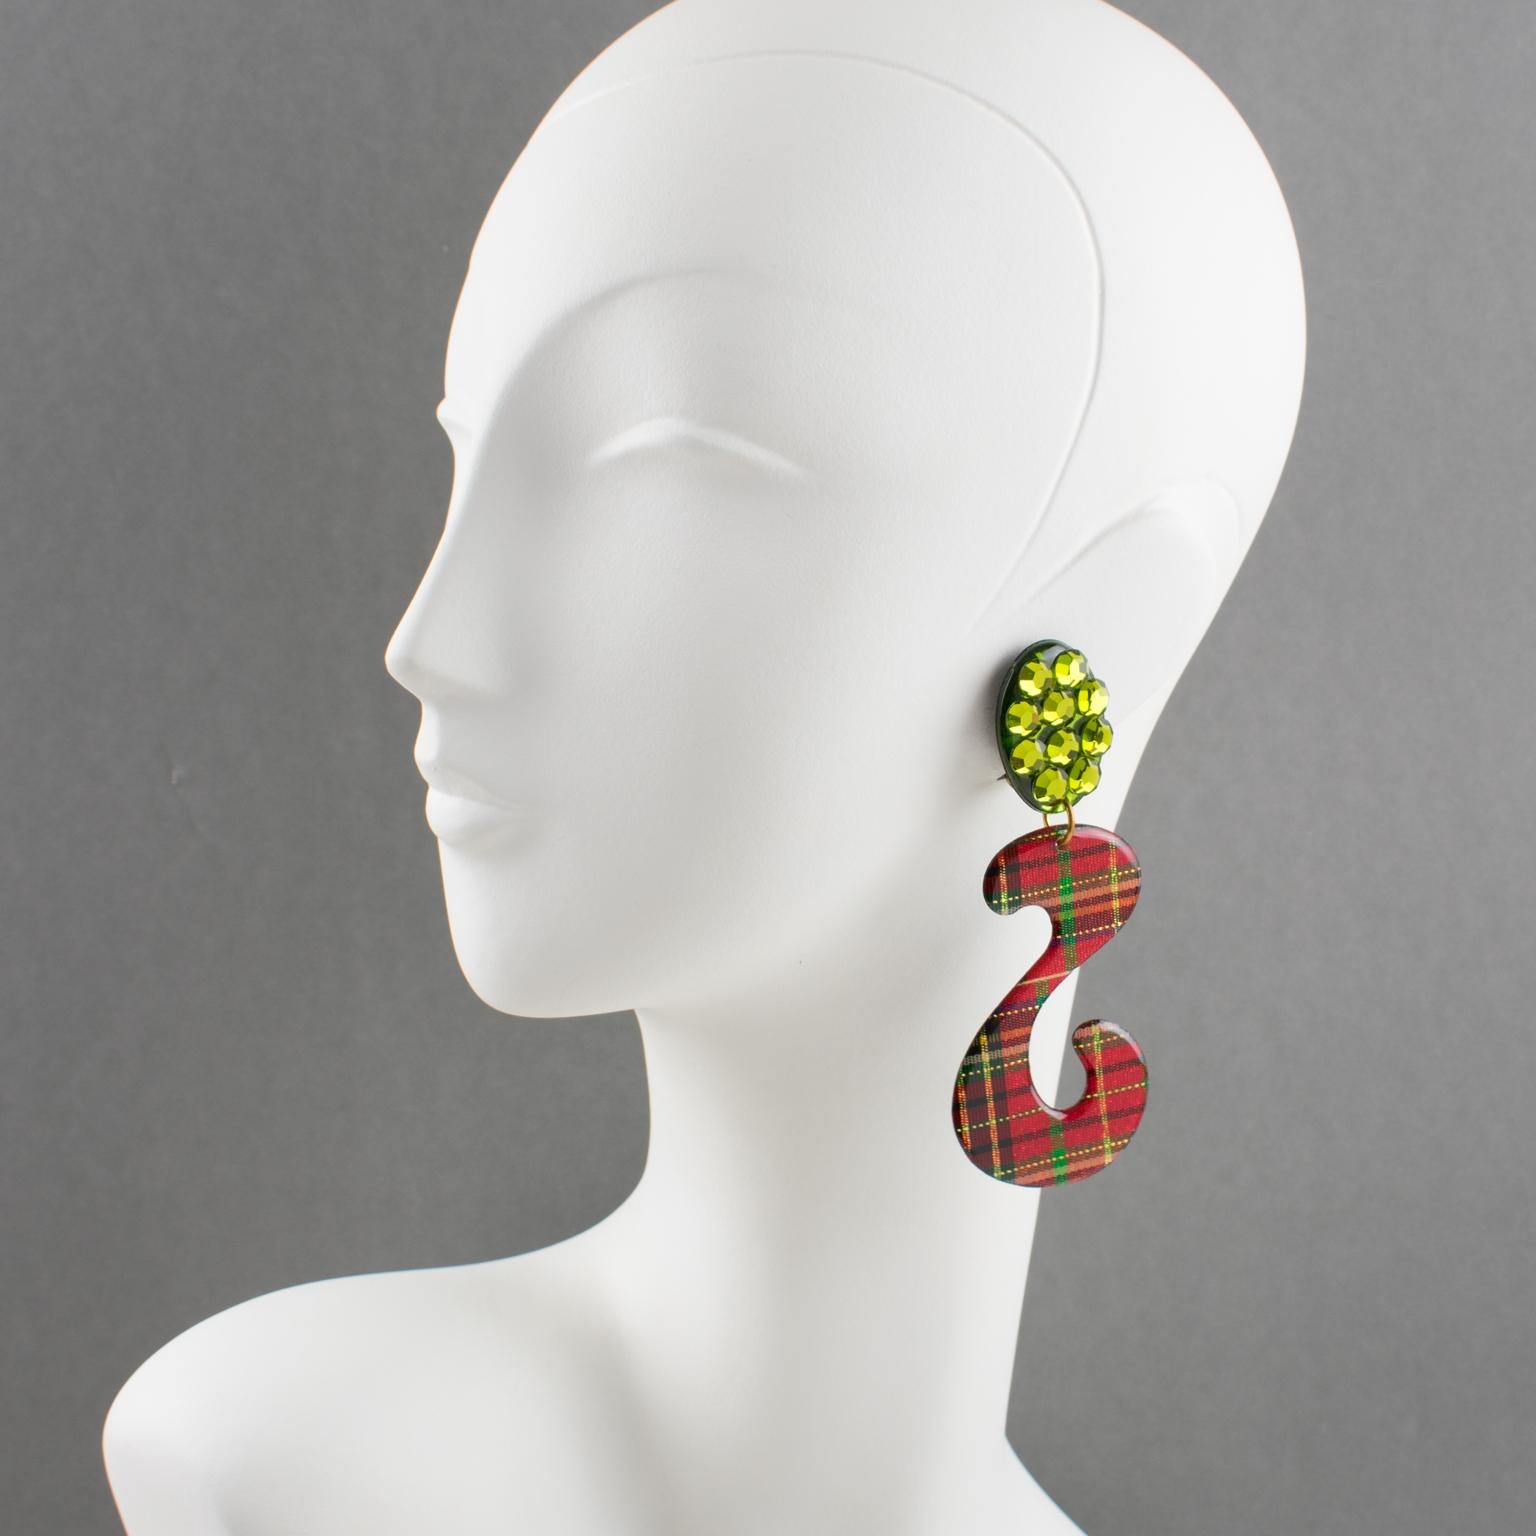 These impressive Italian Lucite or Resin dangling clip-on earrings feature an oversized chandelier shape with an 